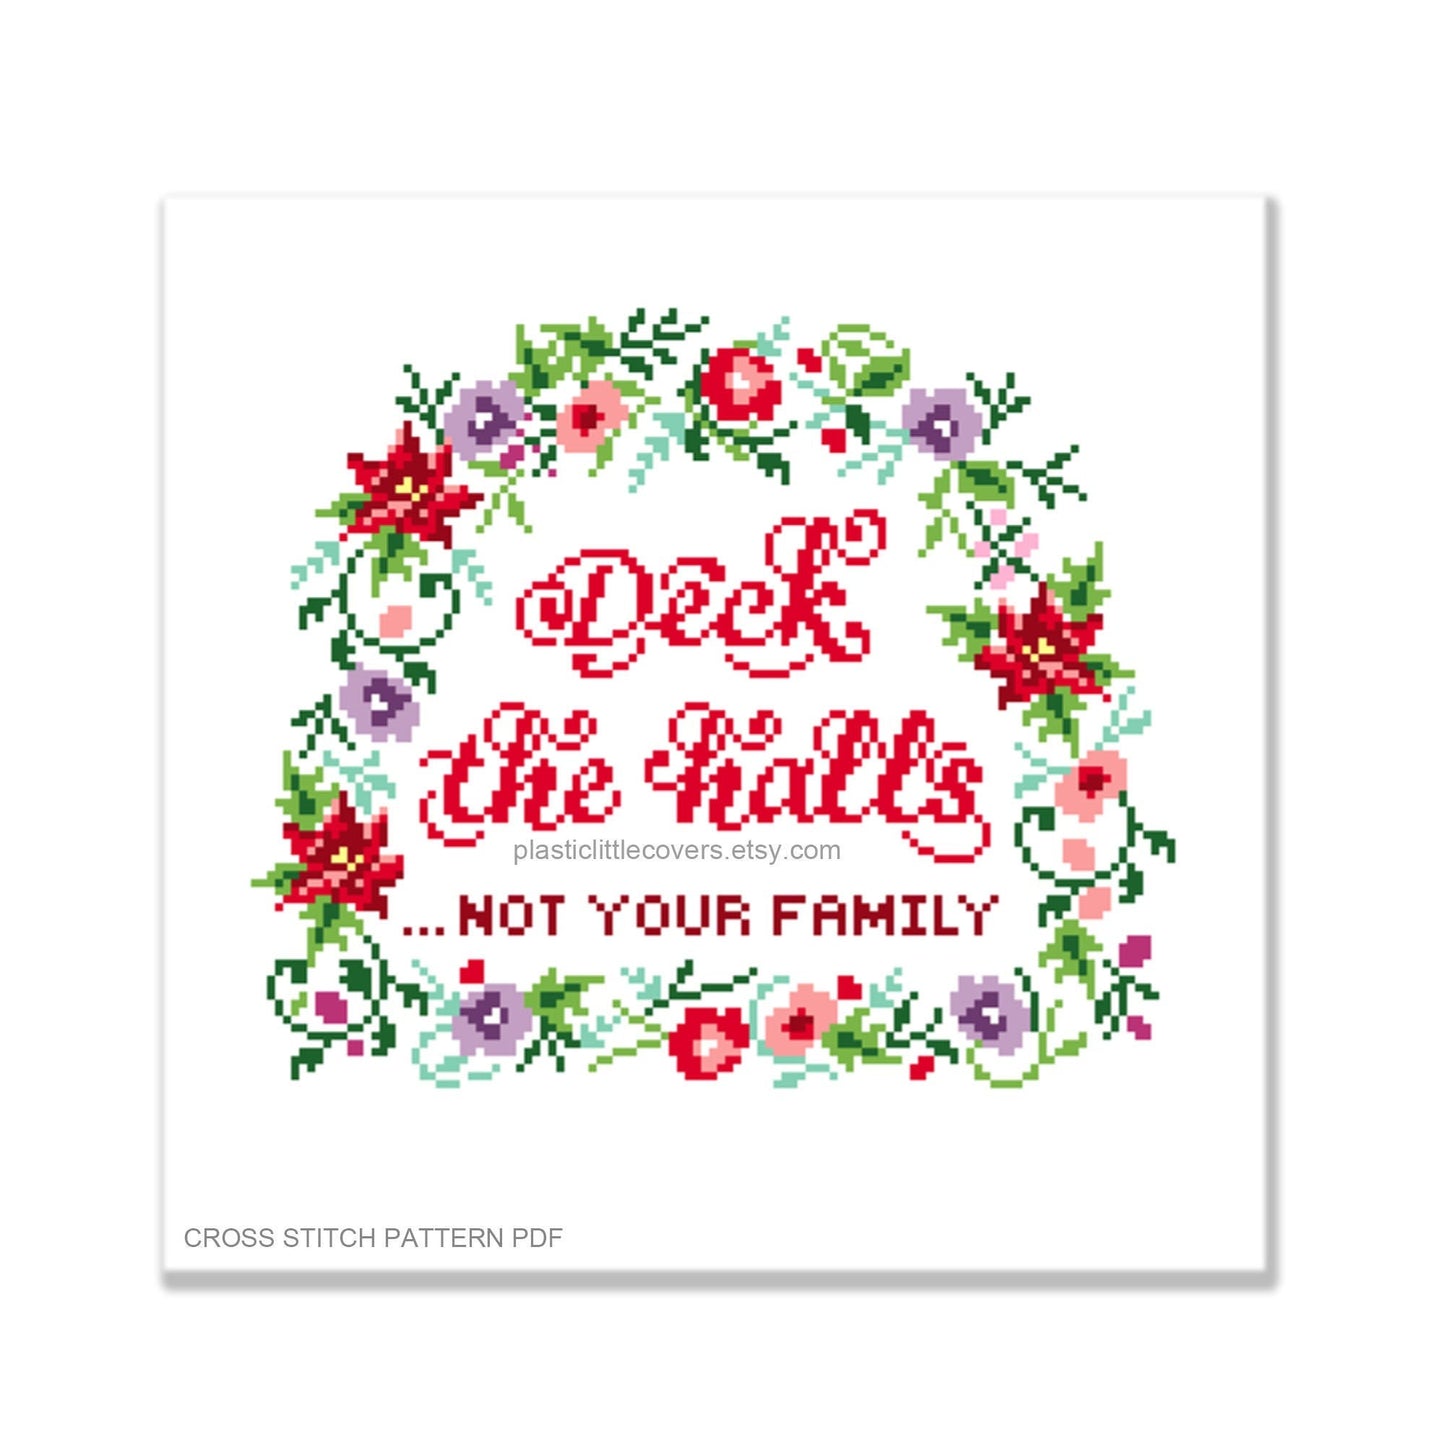 Deck the Halls... Not Your Family - Christmas Cross Stitch Pattern PDF.